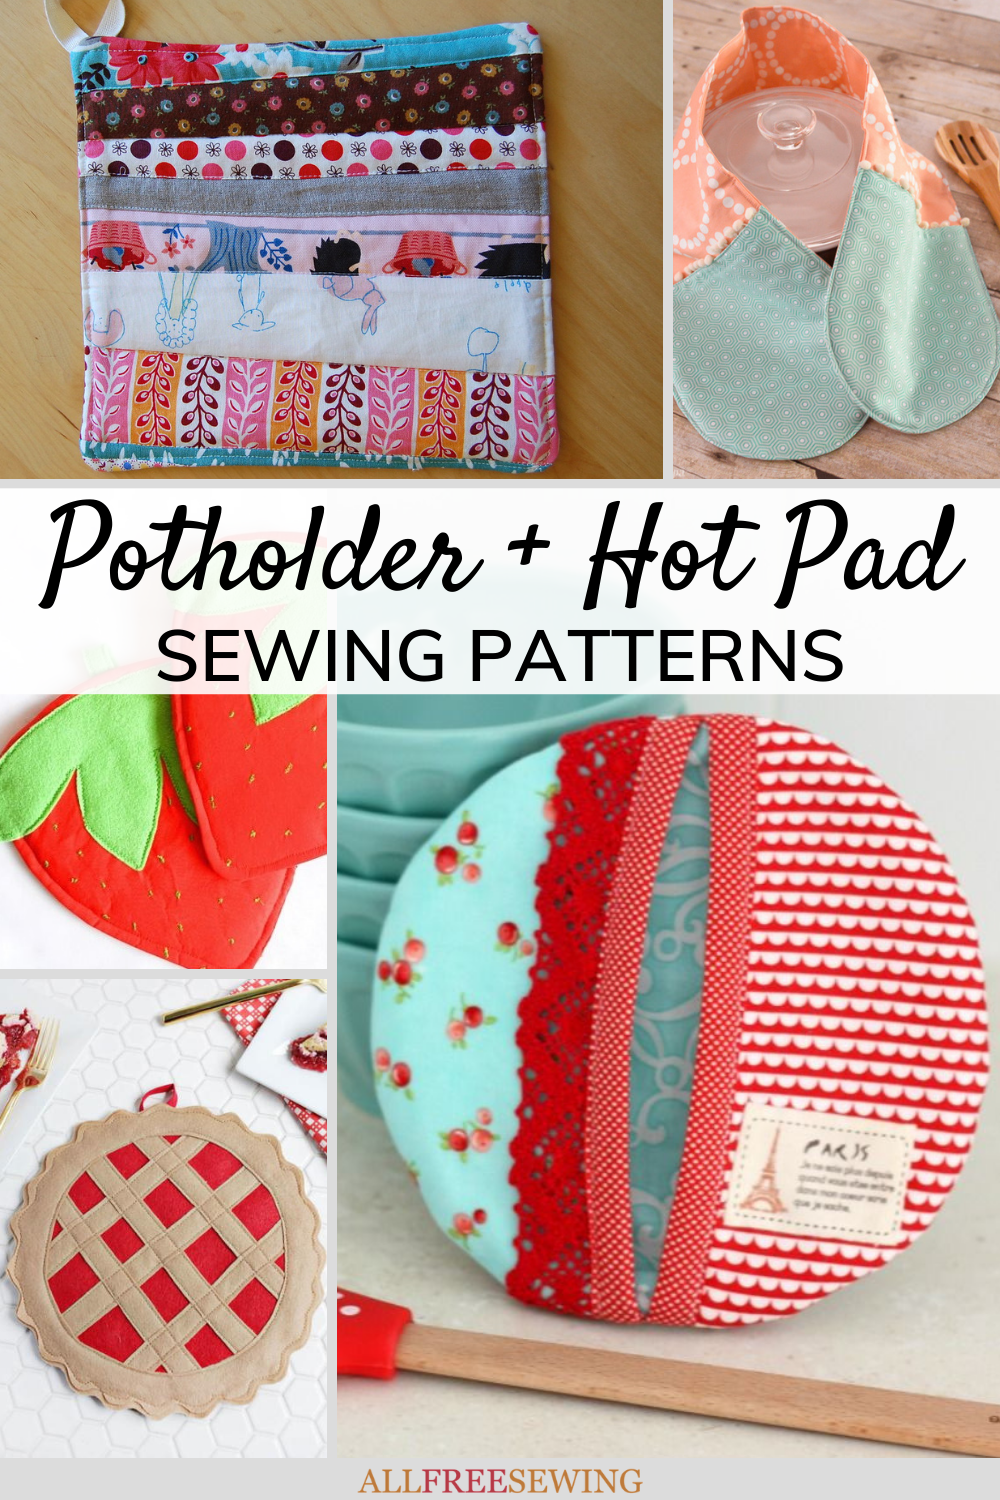 Protect Fingers in Style with This Cute Pot Holder - Quilting